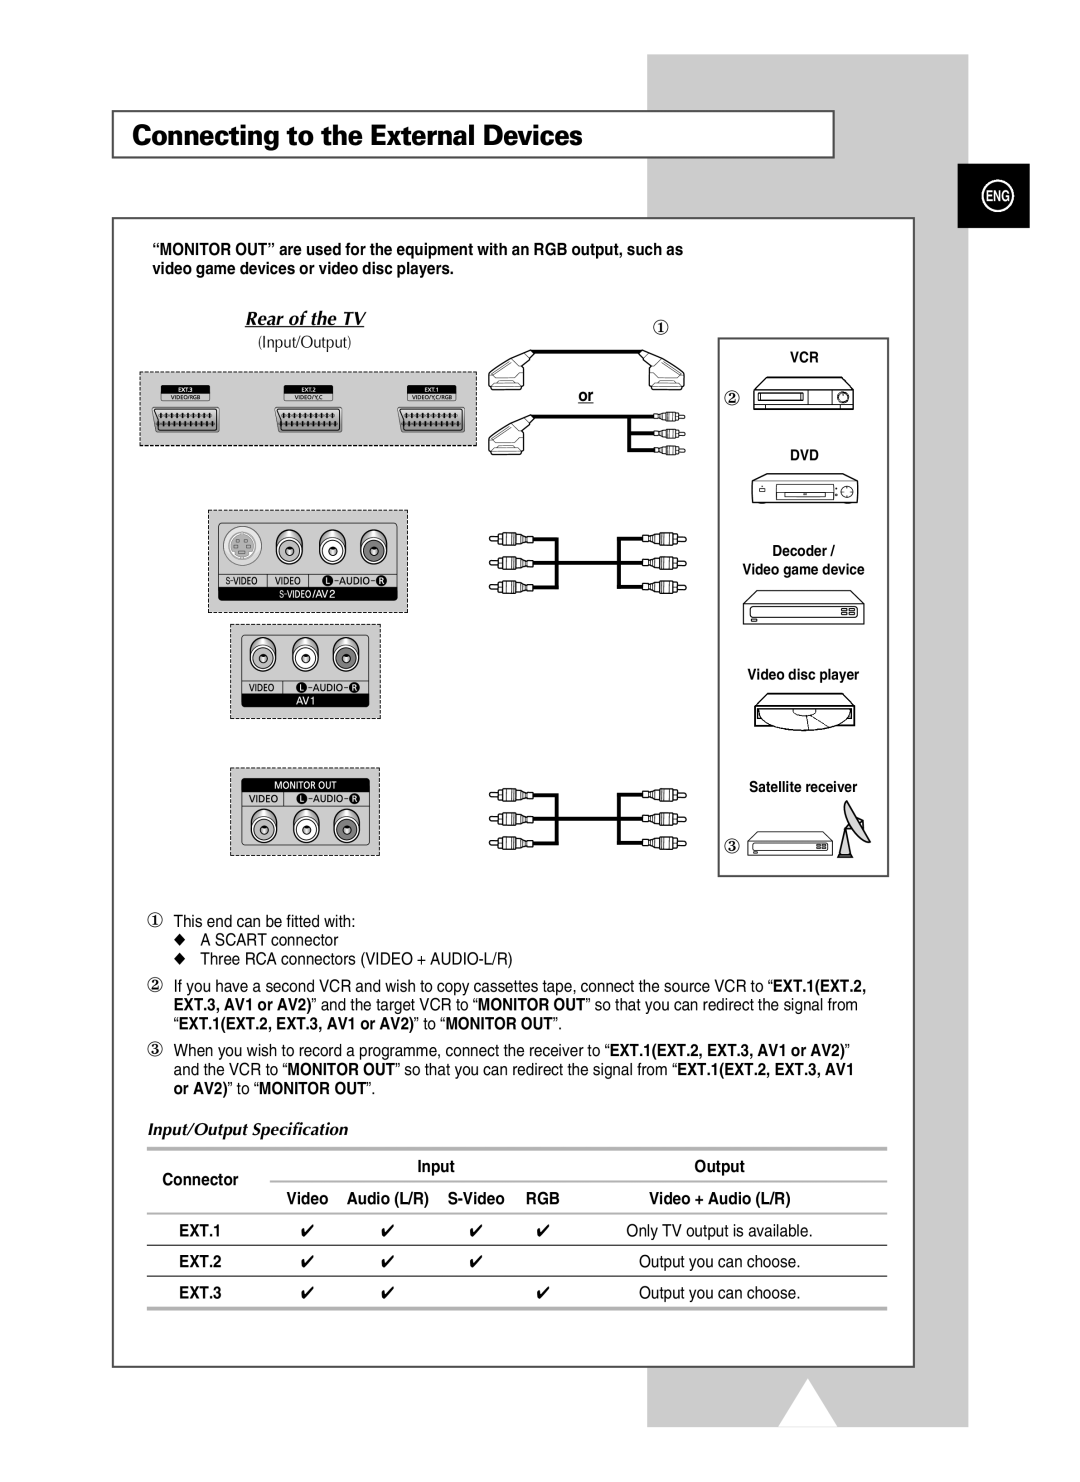 Samsung PS-37S4A1 manual Connecting to the External Devices, Rear of the TV, Input/Output Specification 